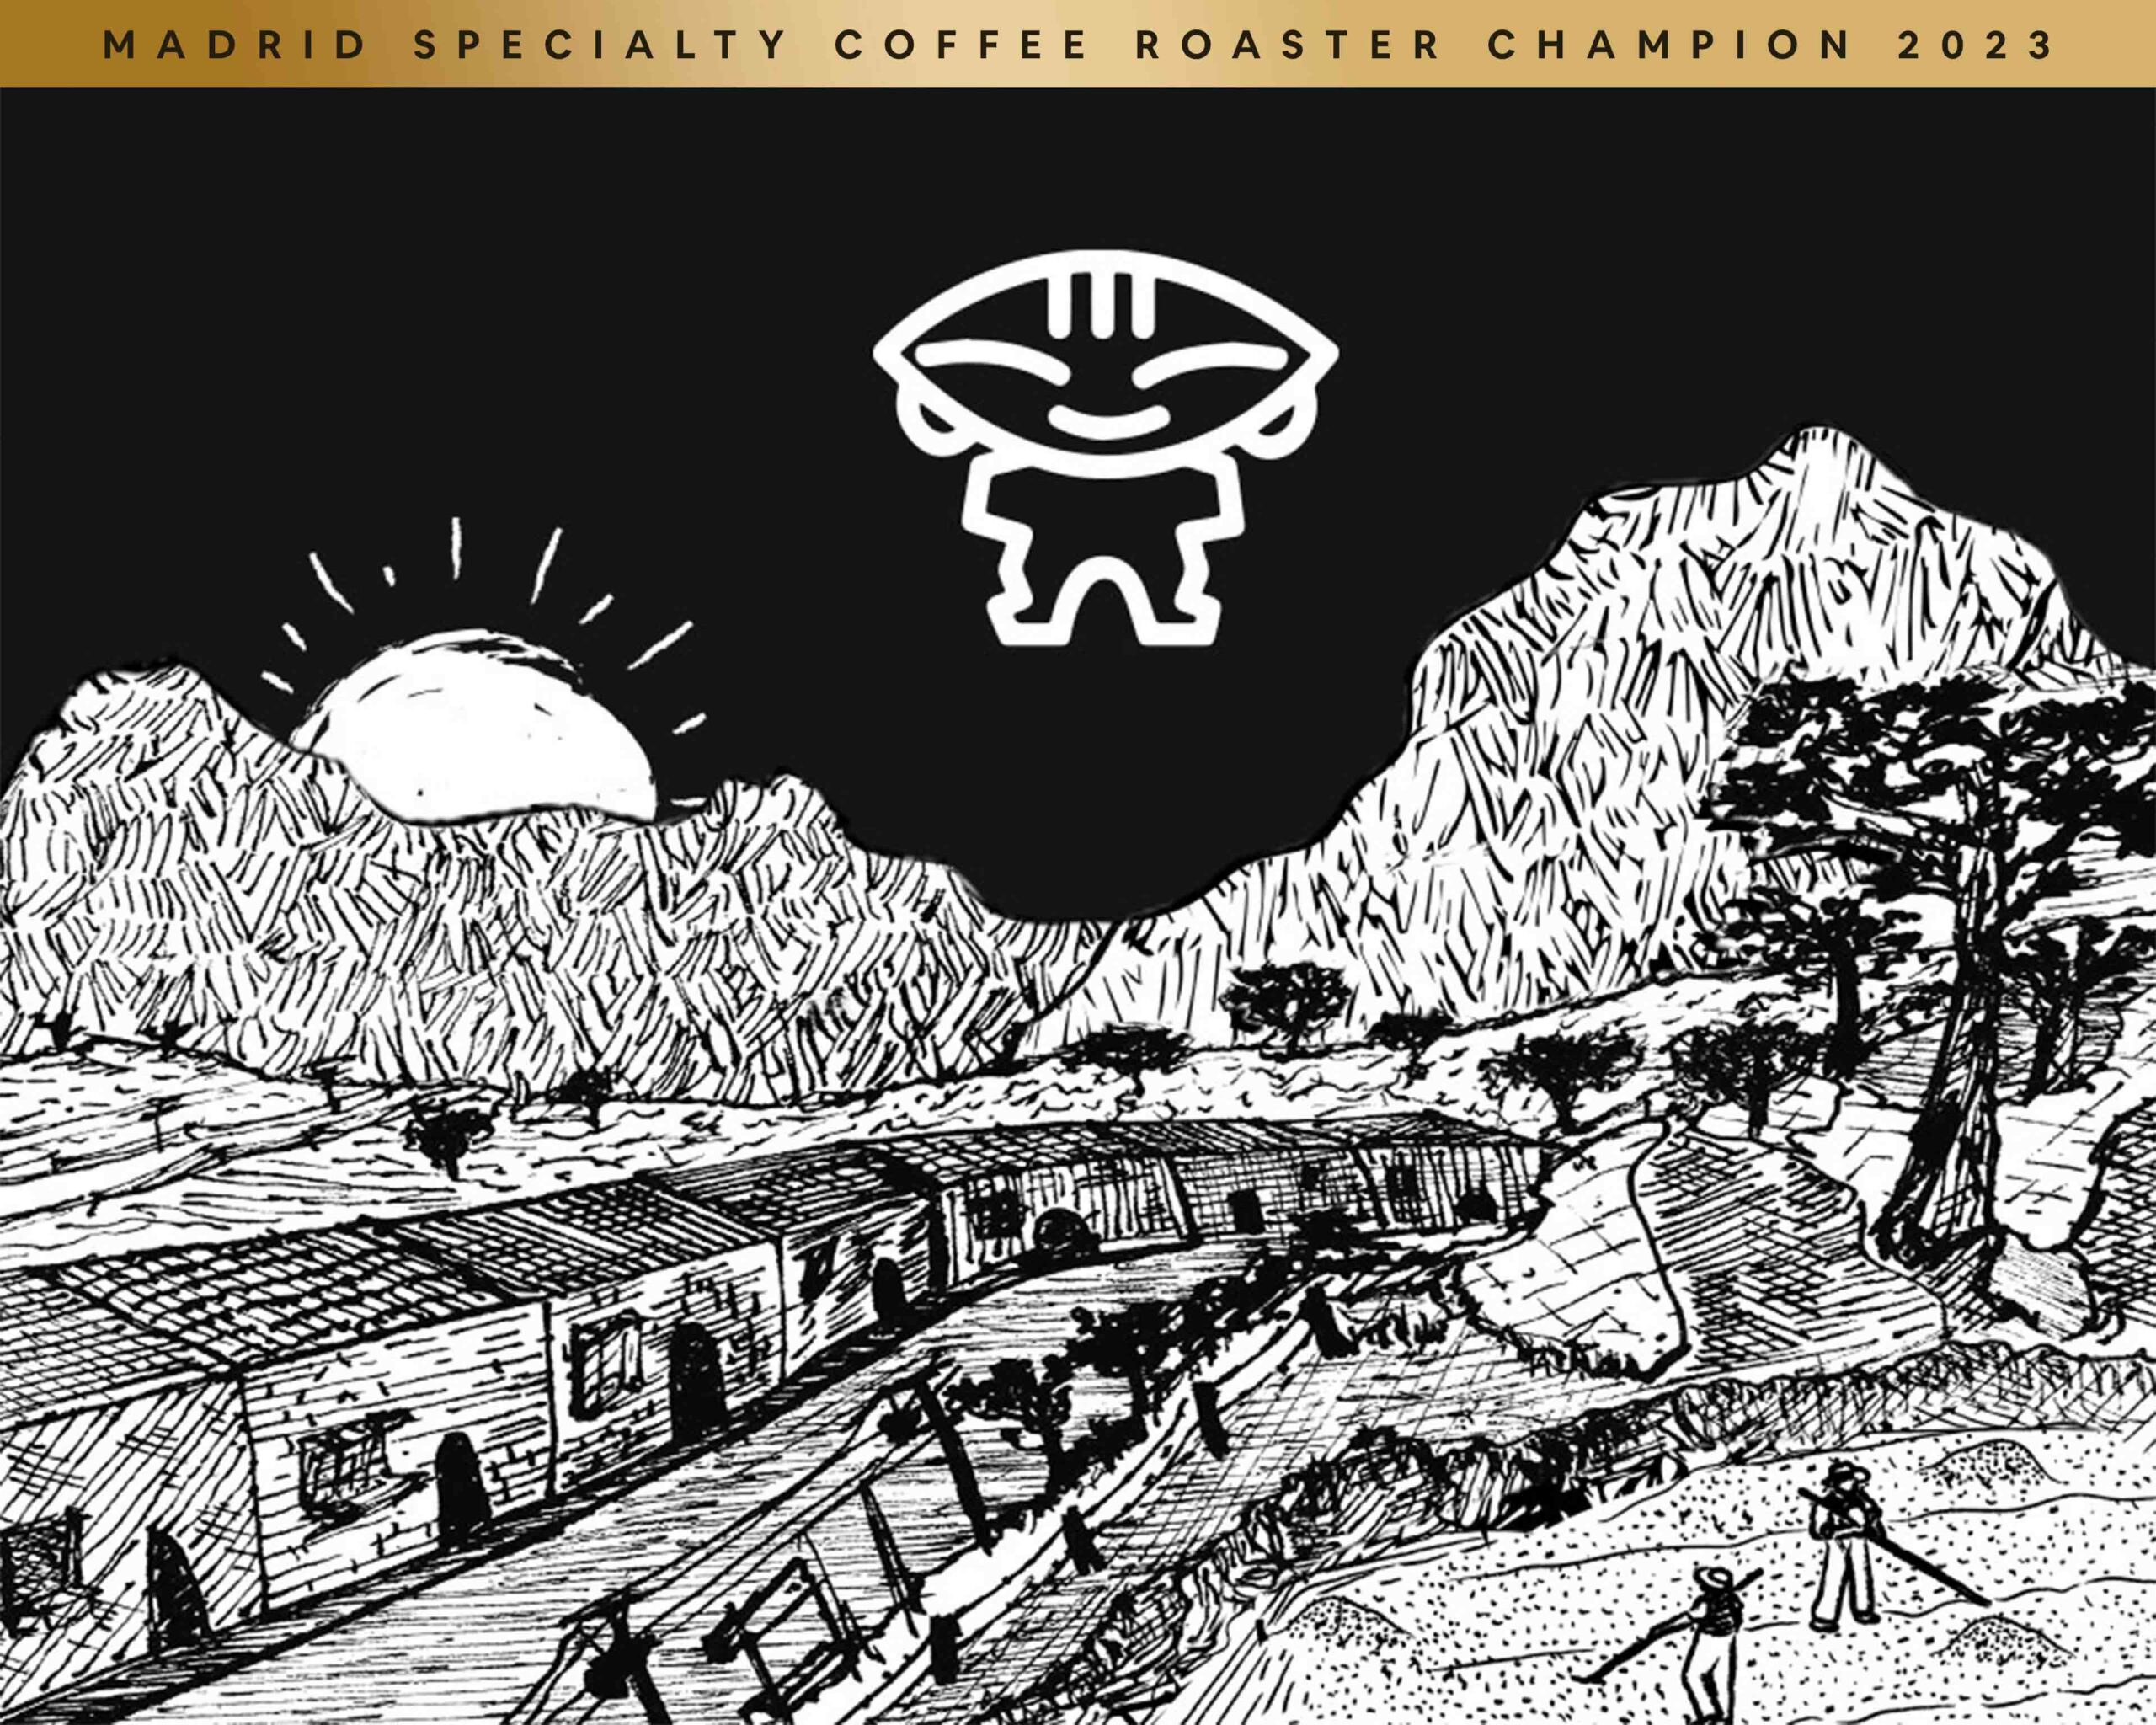 Specialty Coffee Madrid roaster champuion 2023